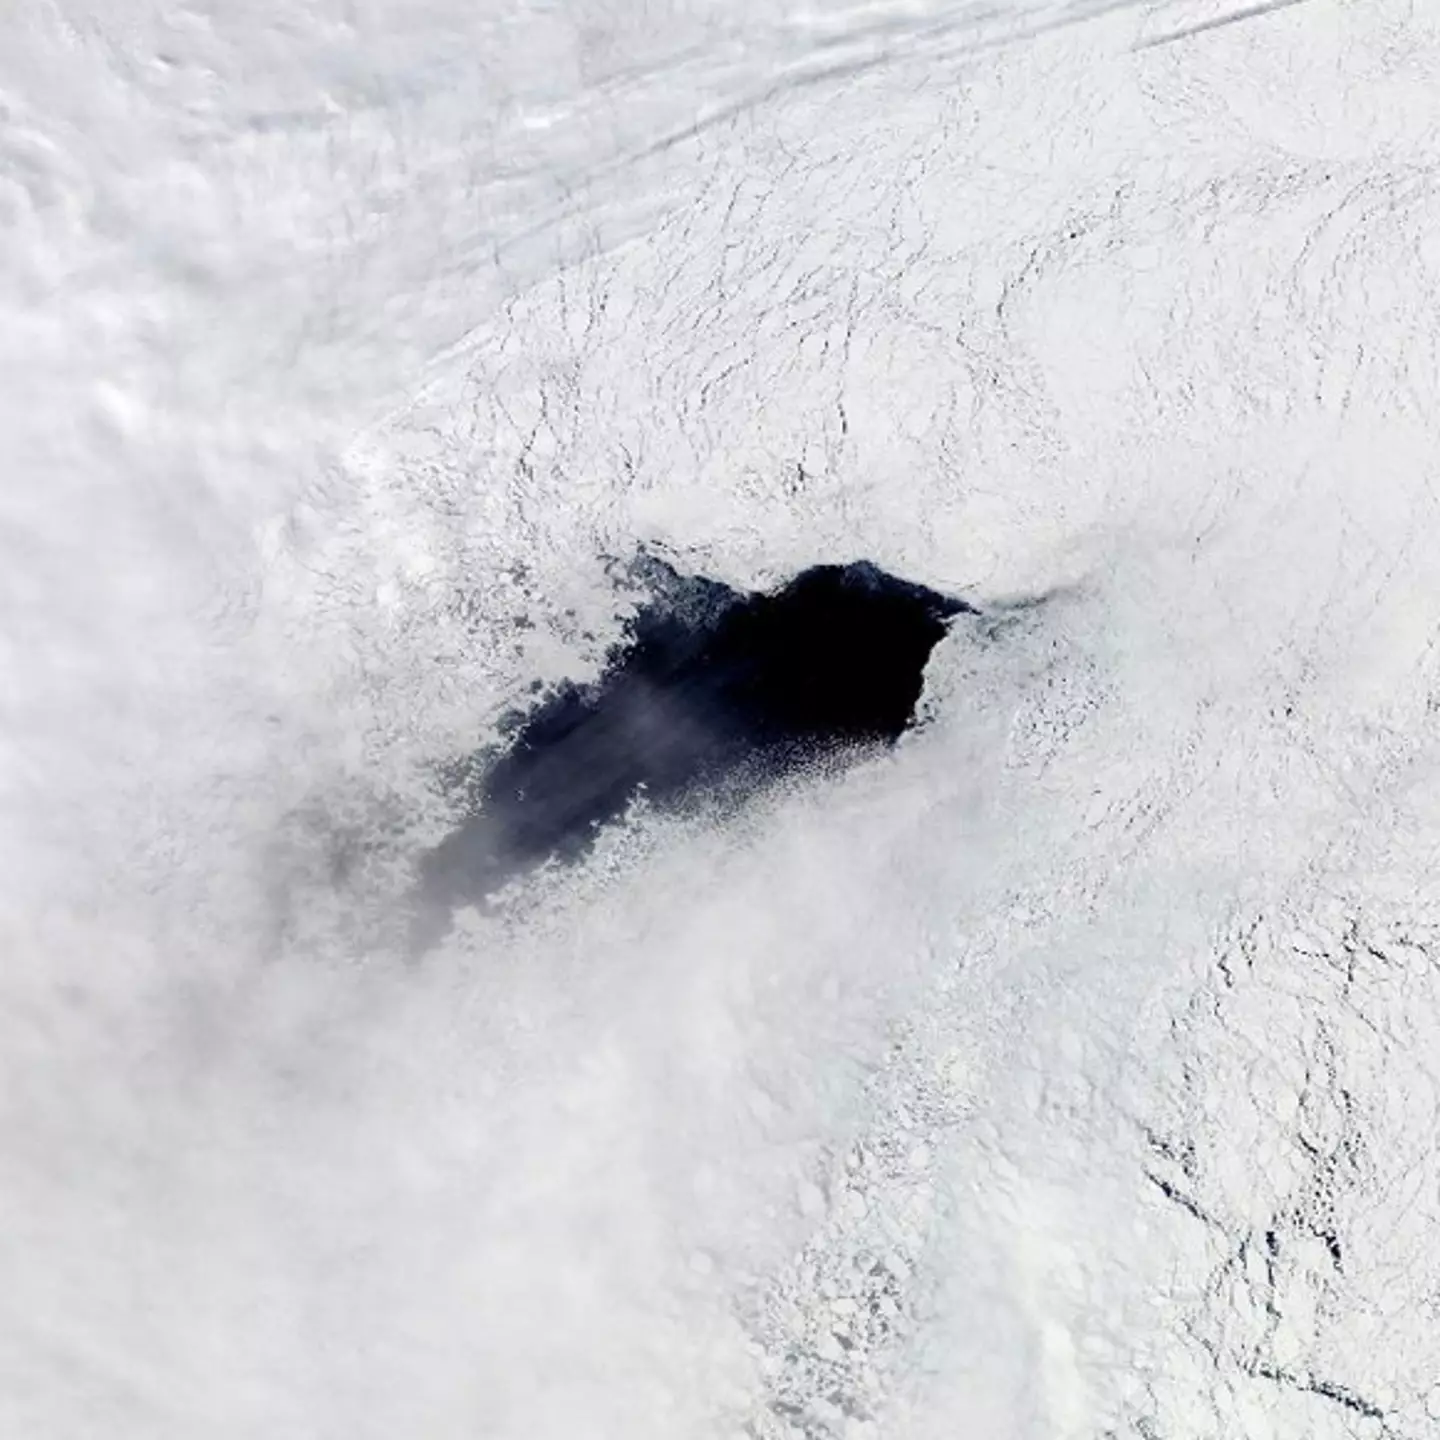 Scientists solve 50-year mystery of giant hole punched in Antarctic ice